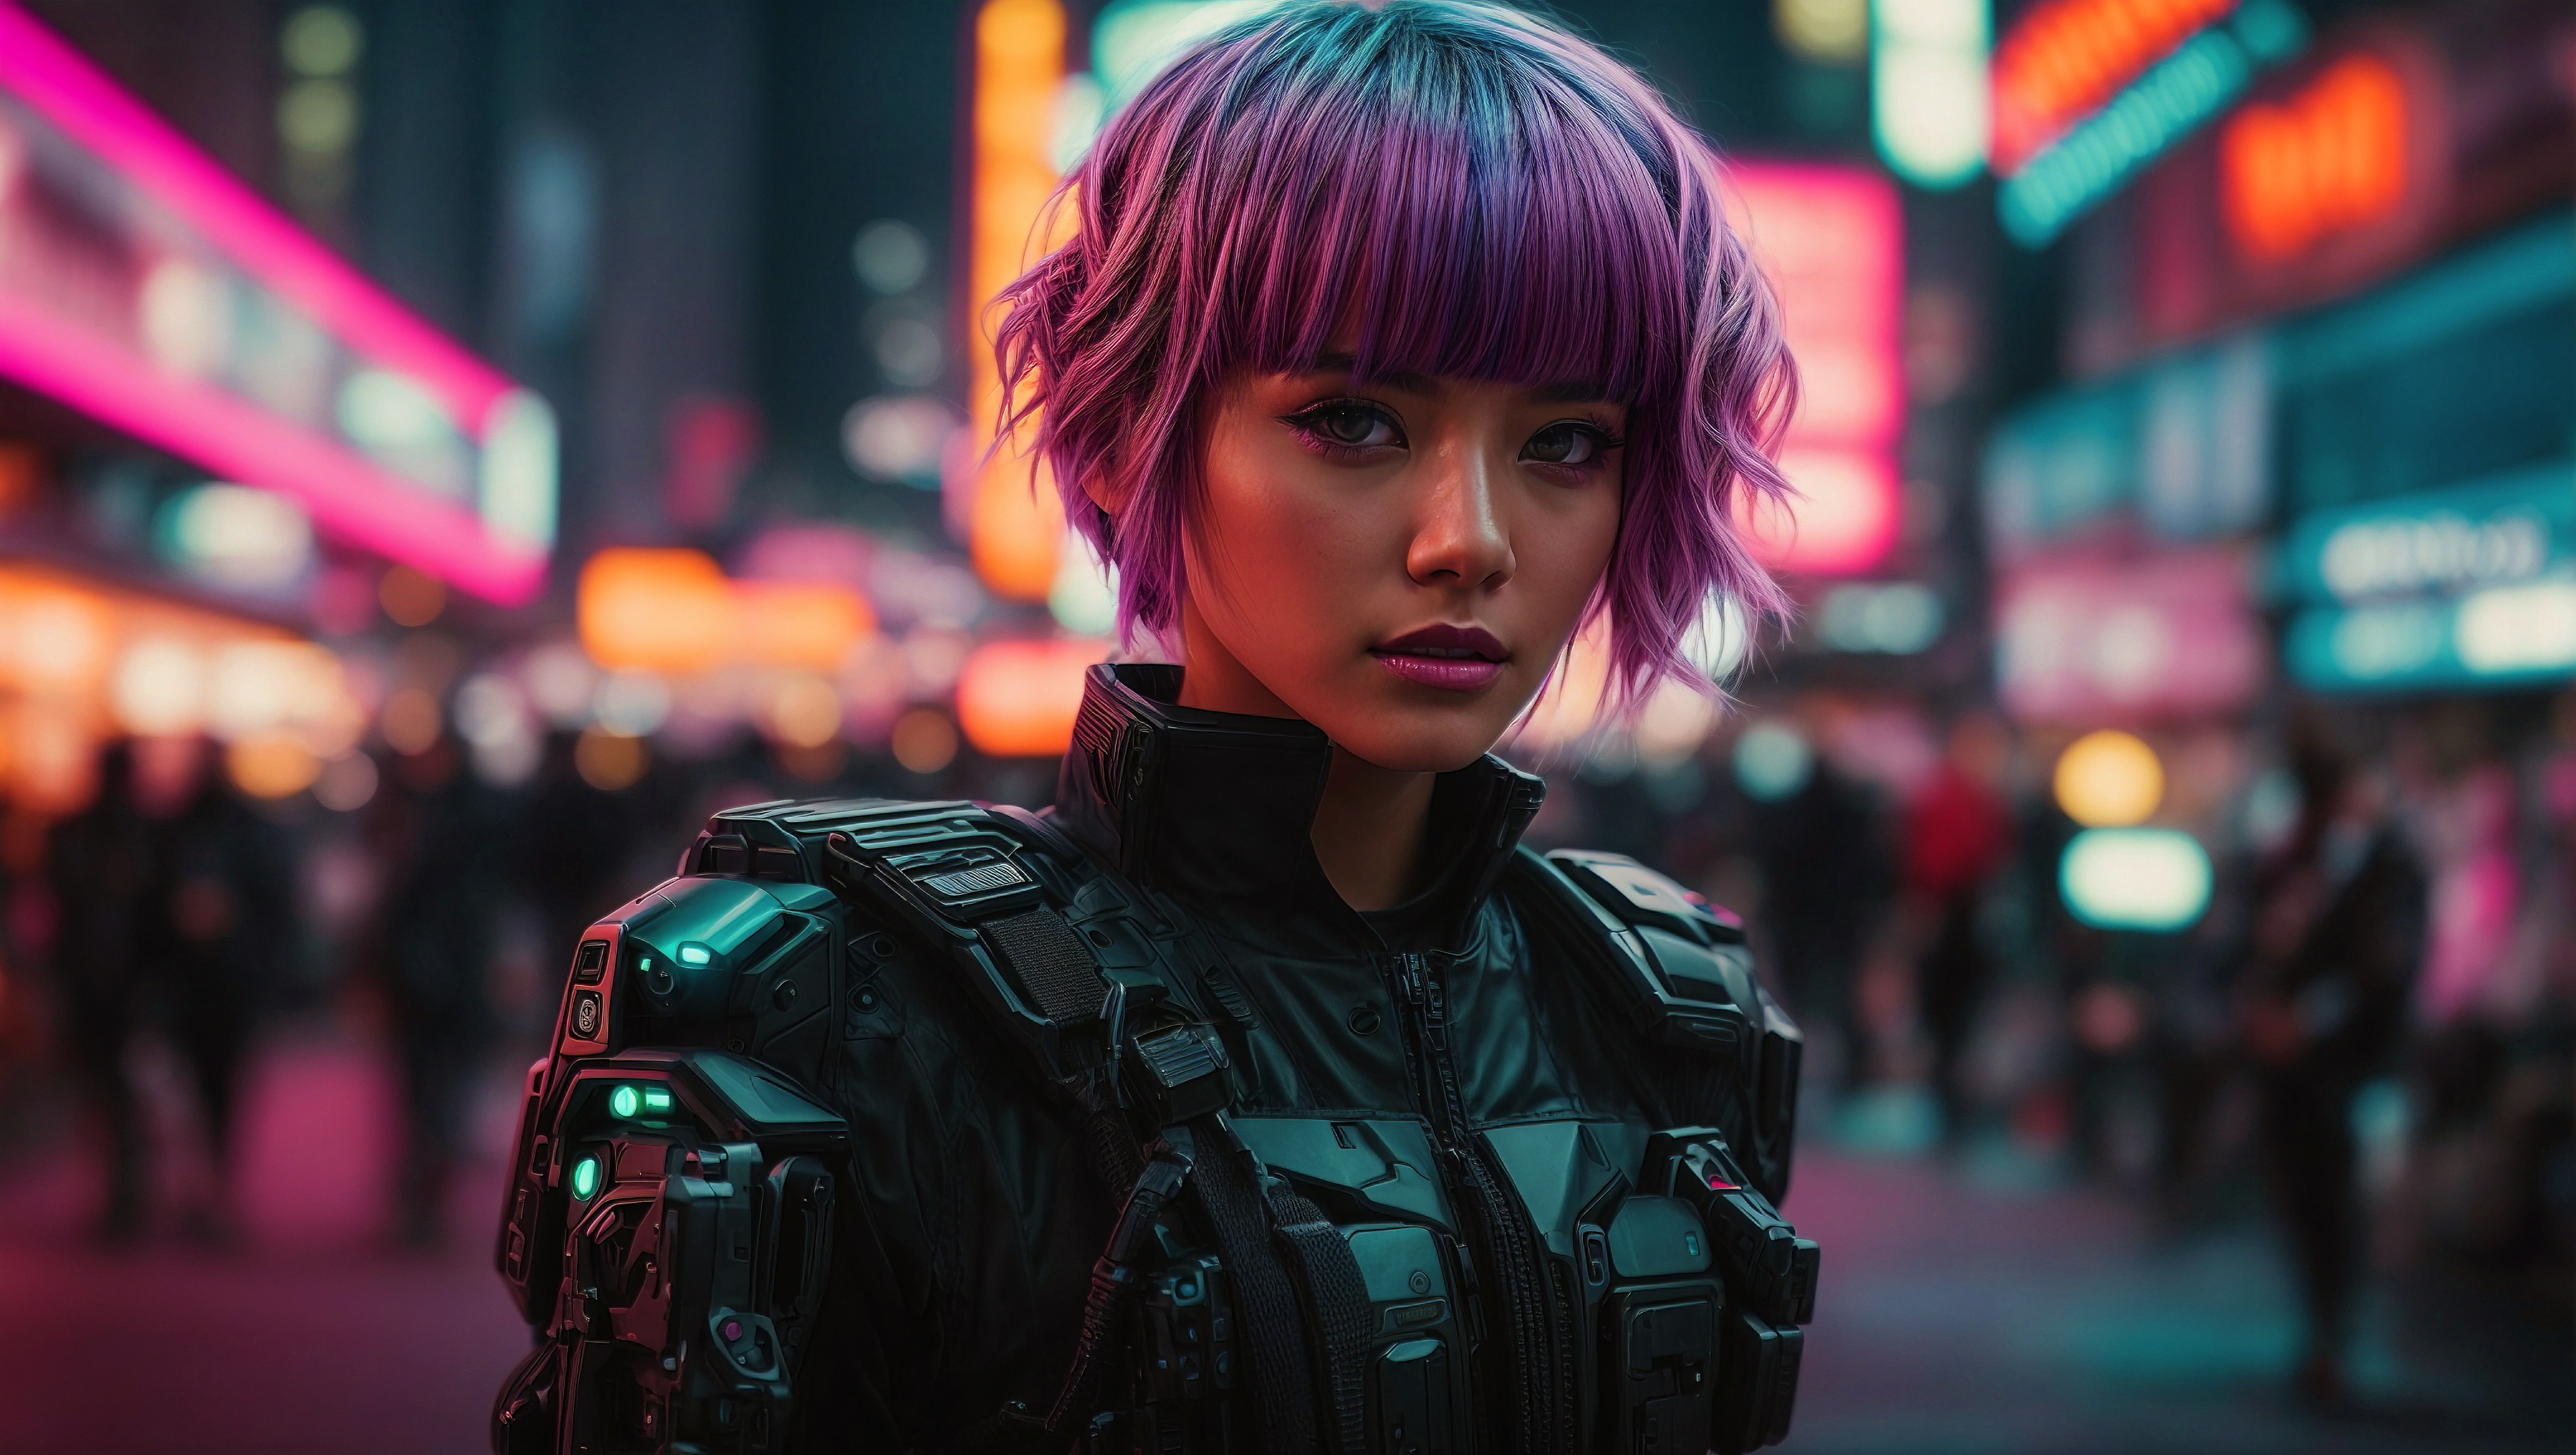 Free photo Woman in futuristic cyber suit looking directly into camera